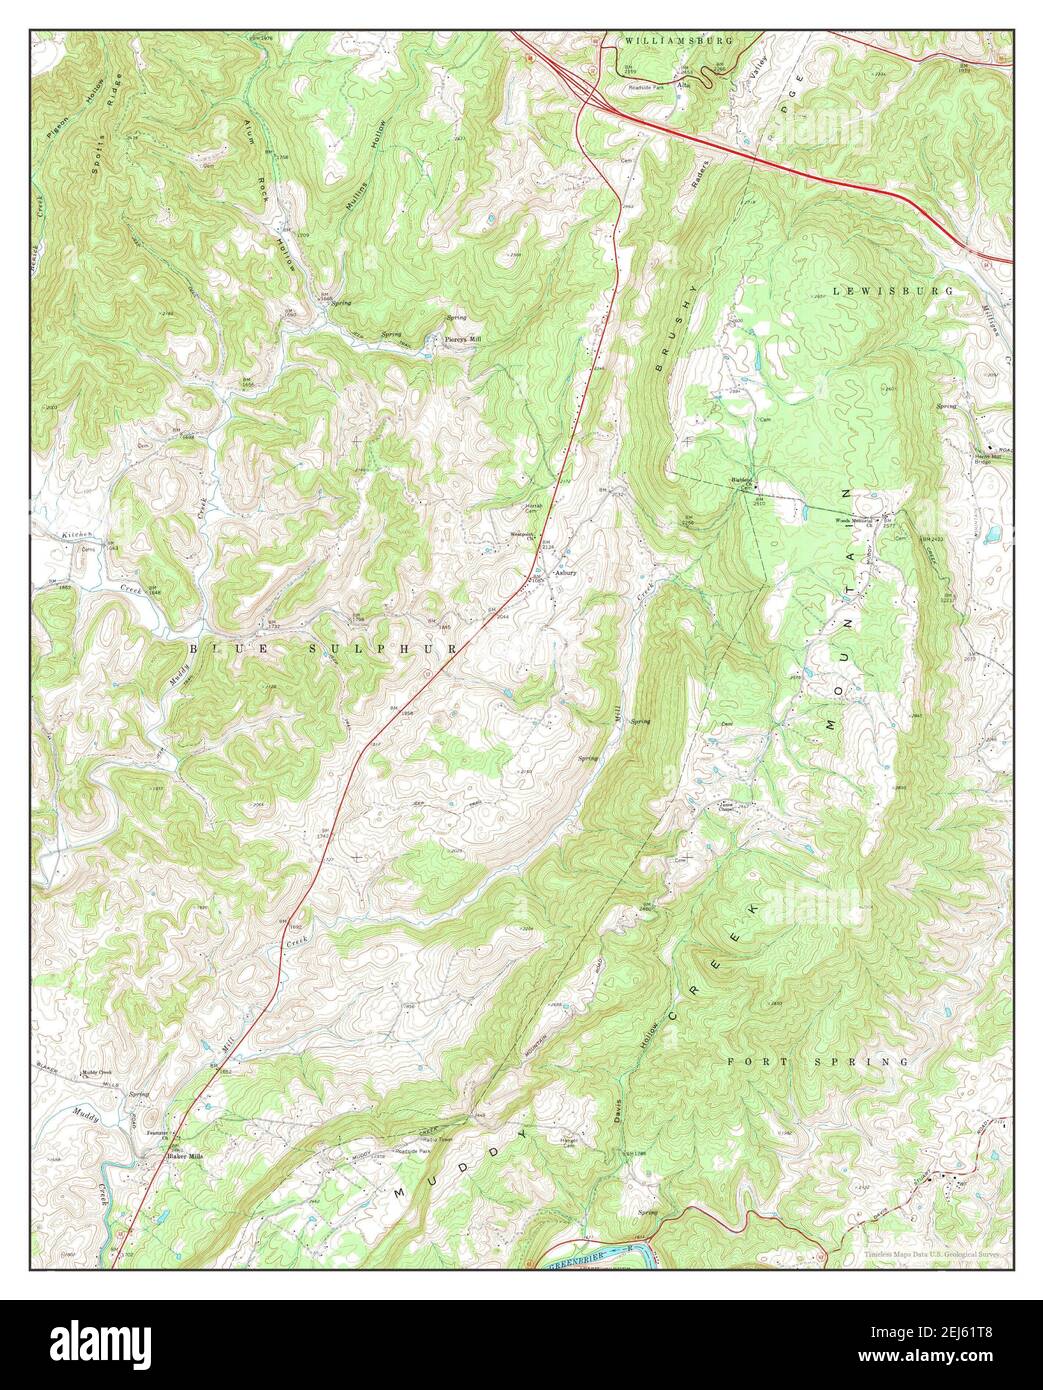 Asbury, West Virginia, map 1972, 1:24000, United States of America by Timeless Maps, data U.S. Geological Survey Stock Photo